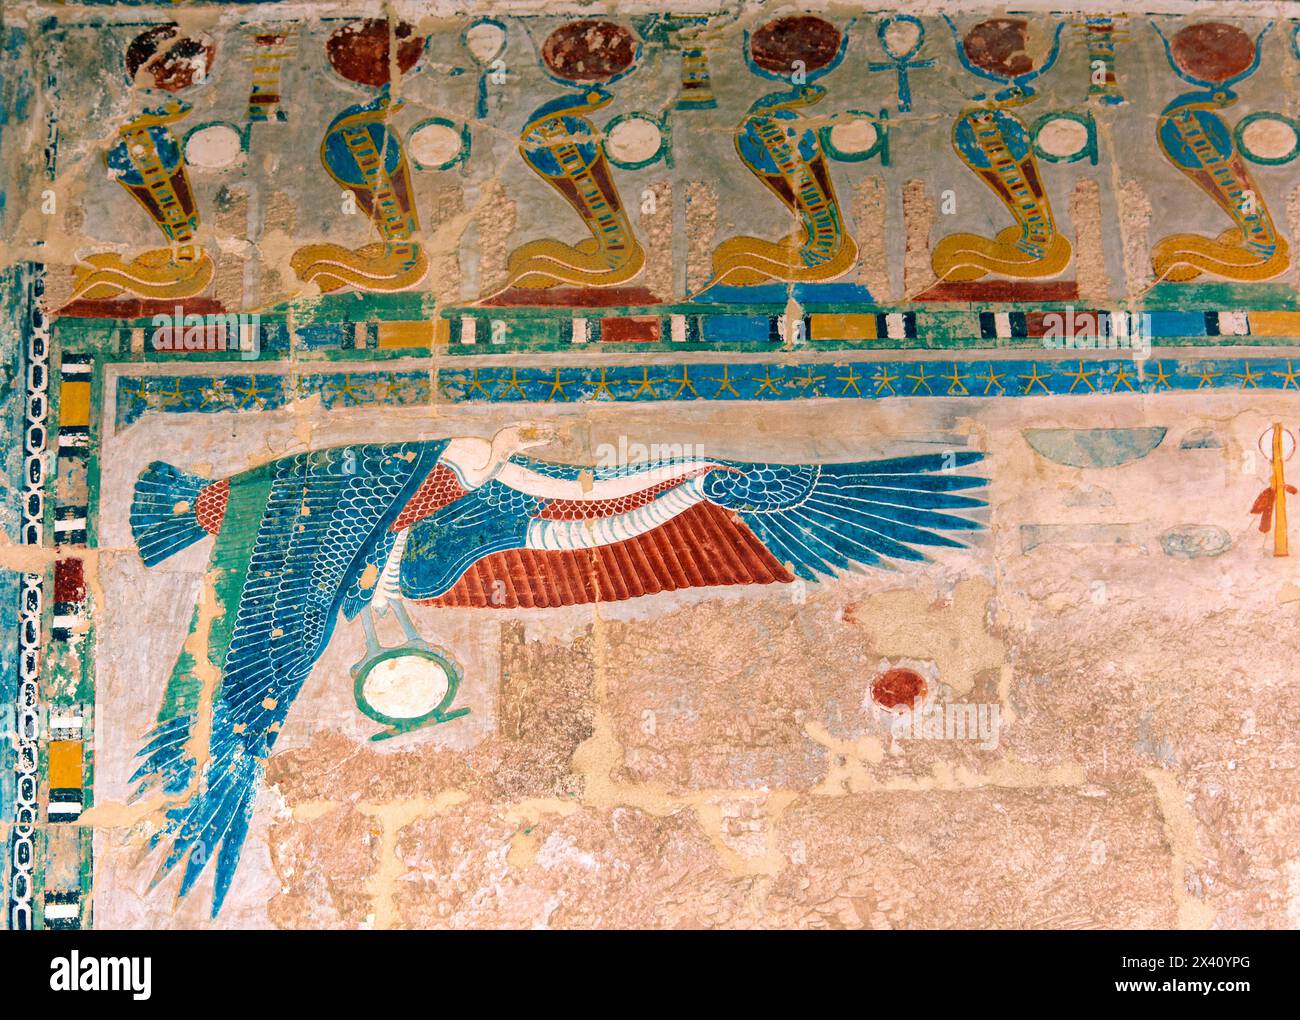 Mortuary temple of Hatshepsut showing wall painting detailed mural inside Queen Hatshepsut Temple in Valley of the Kings near Luxor, Egypt; Egypt Stock Photo